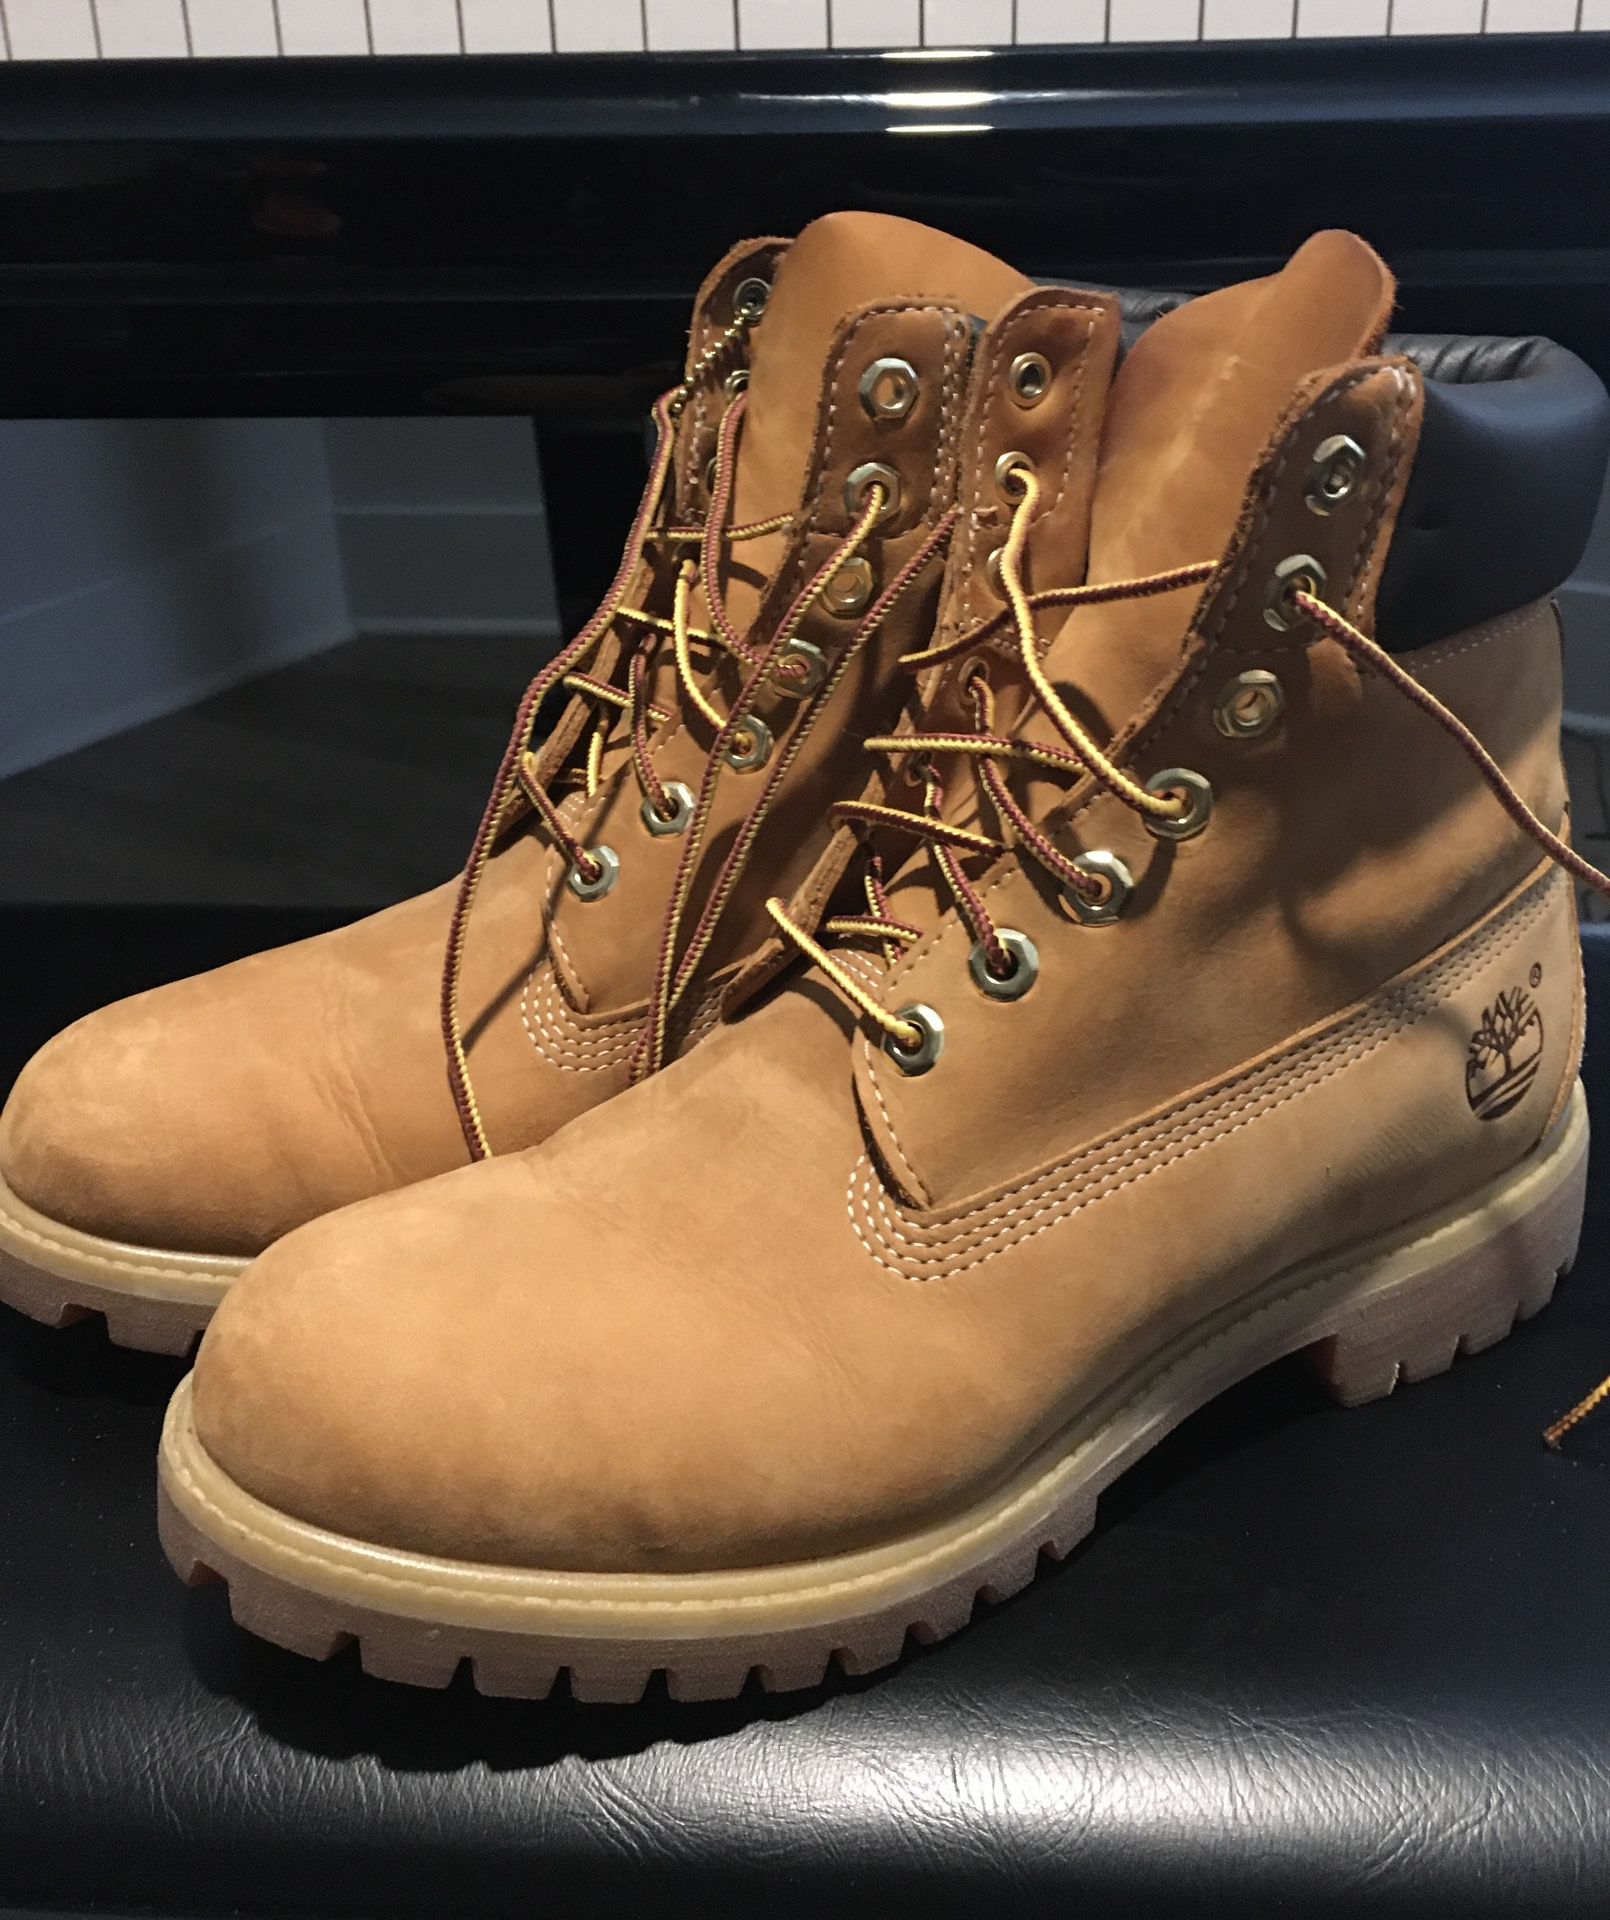 $90 Timberland Boots Size 7.5 In Men’s 9 In Women’s 